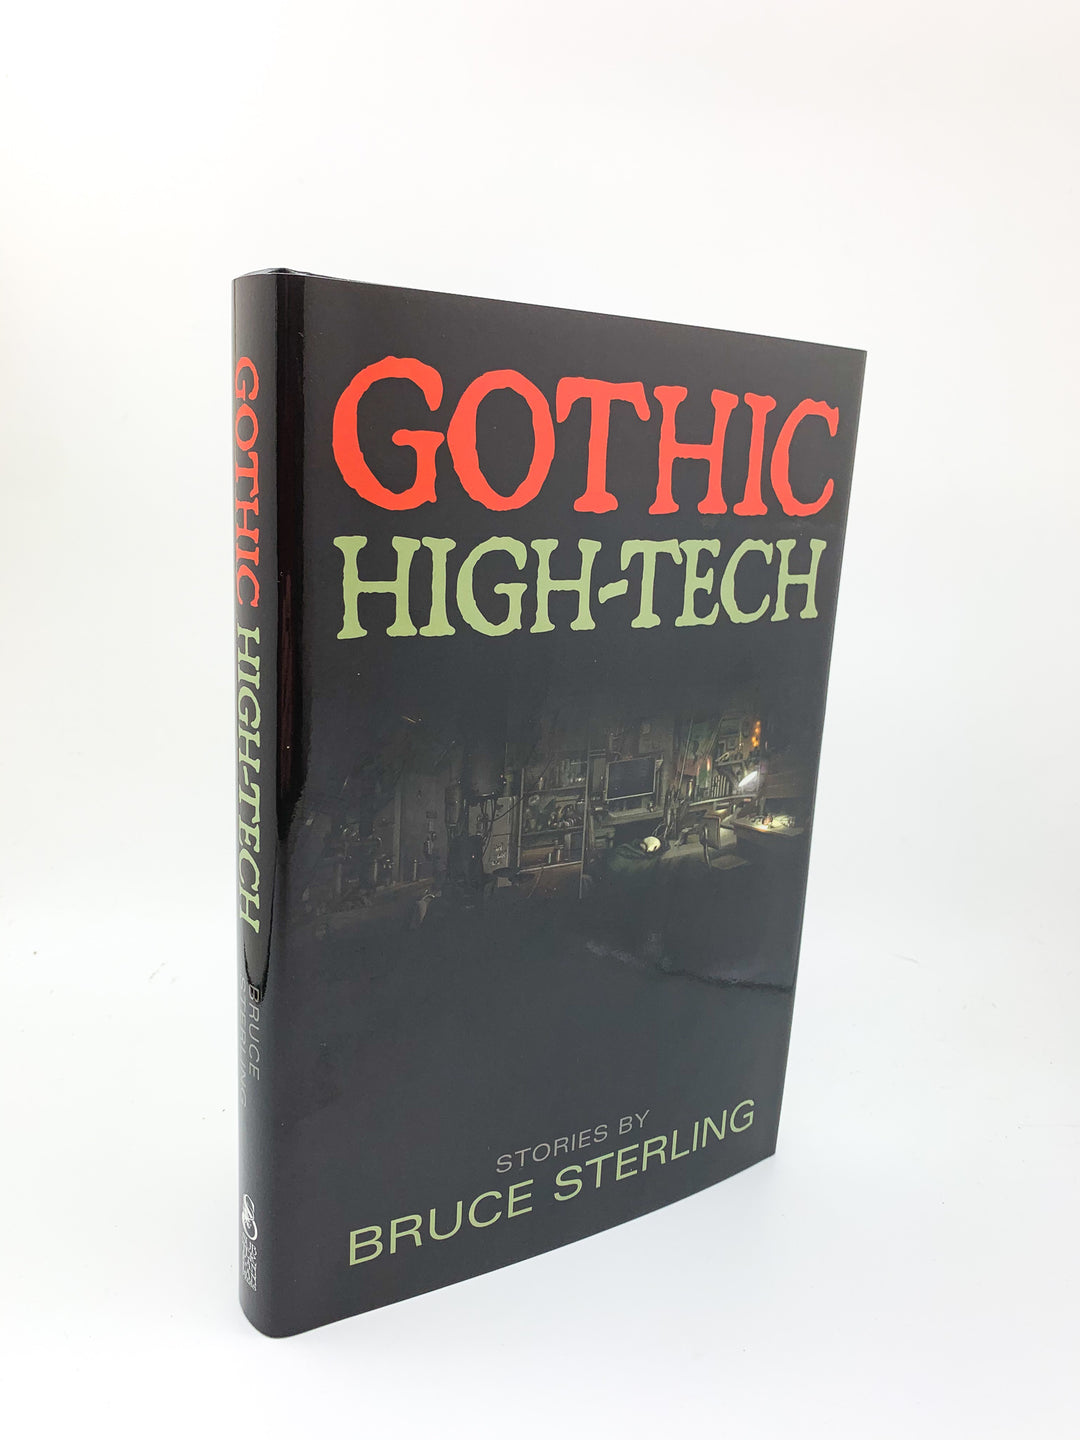 Sterling, Bruce - Gothic High-Tech - SIGNED | front cover